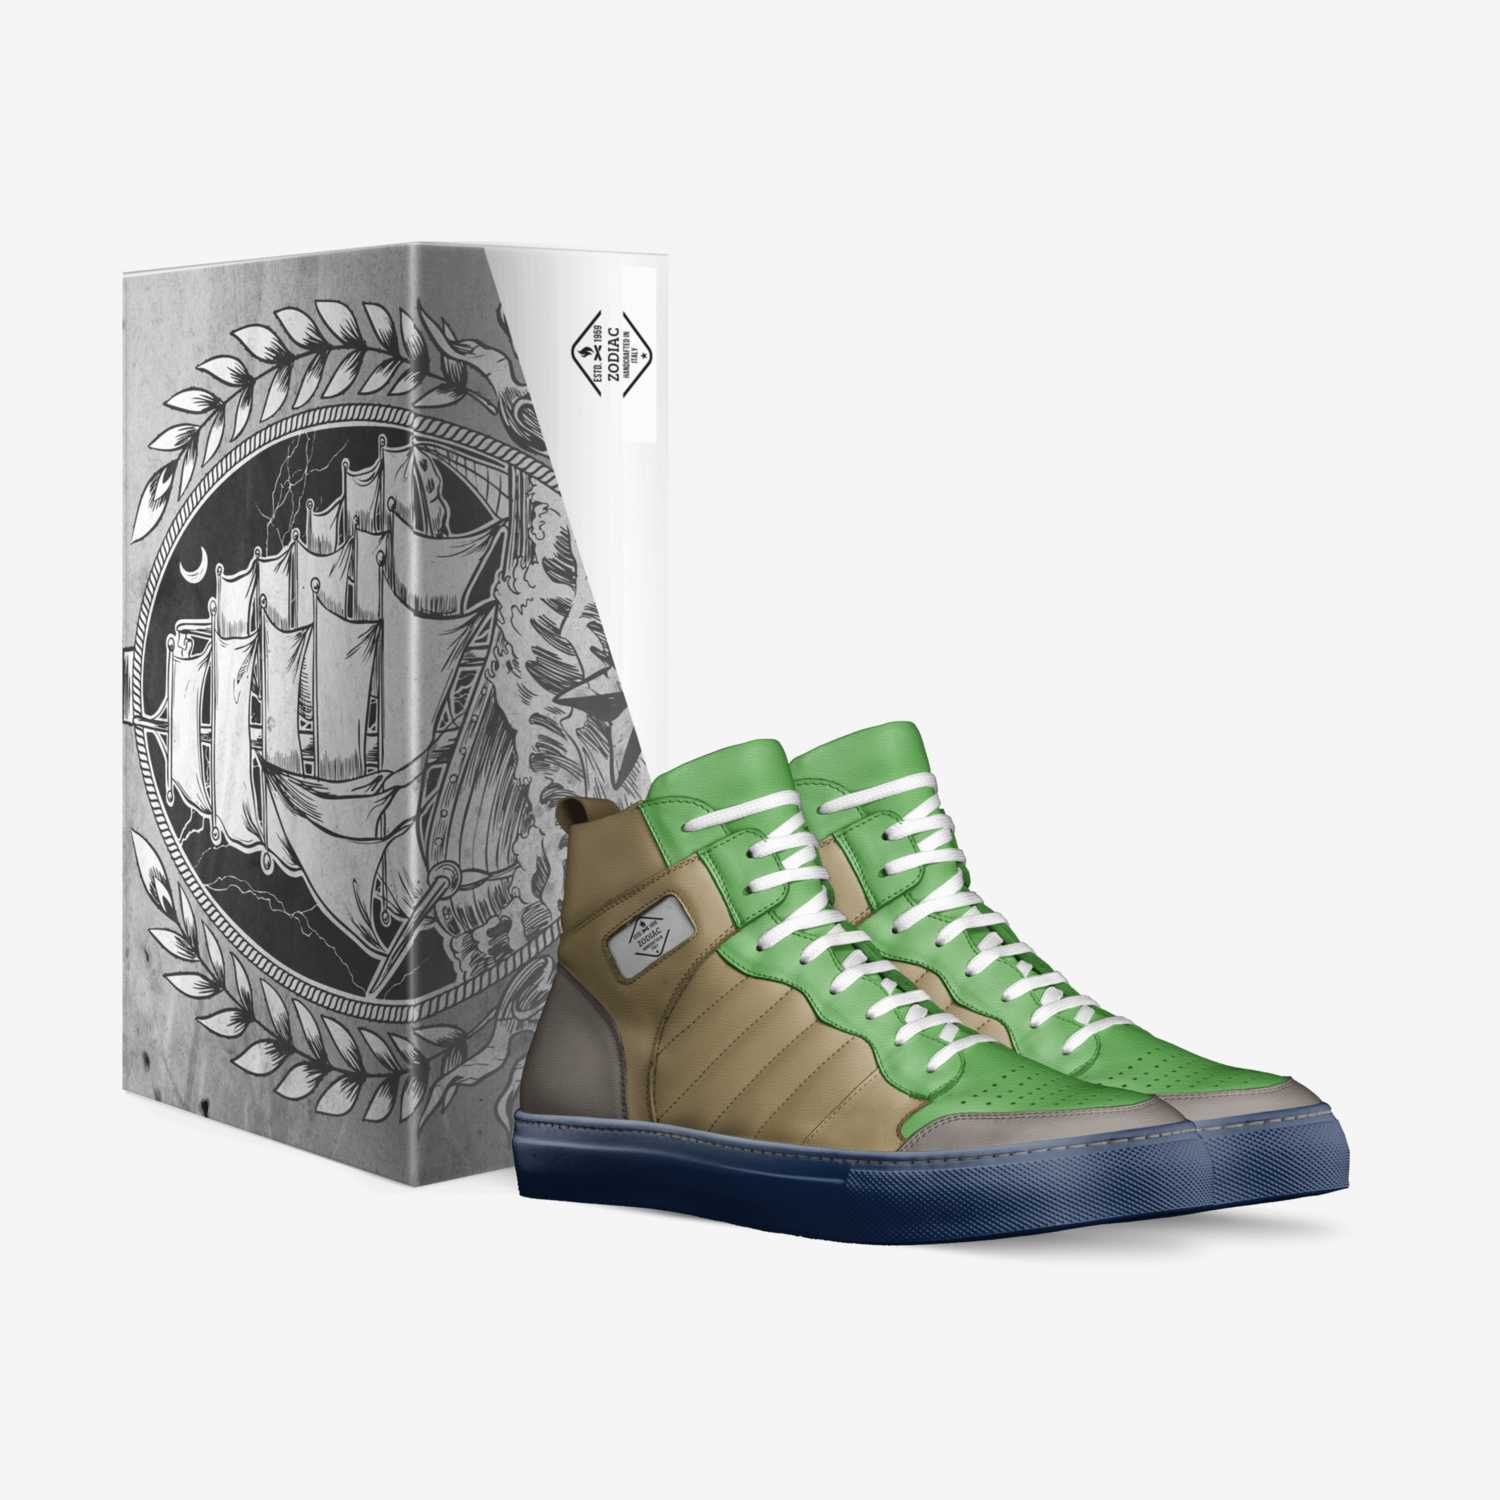 Zodiac custom made in Italy shoes by Dylan Purdy | Box view